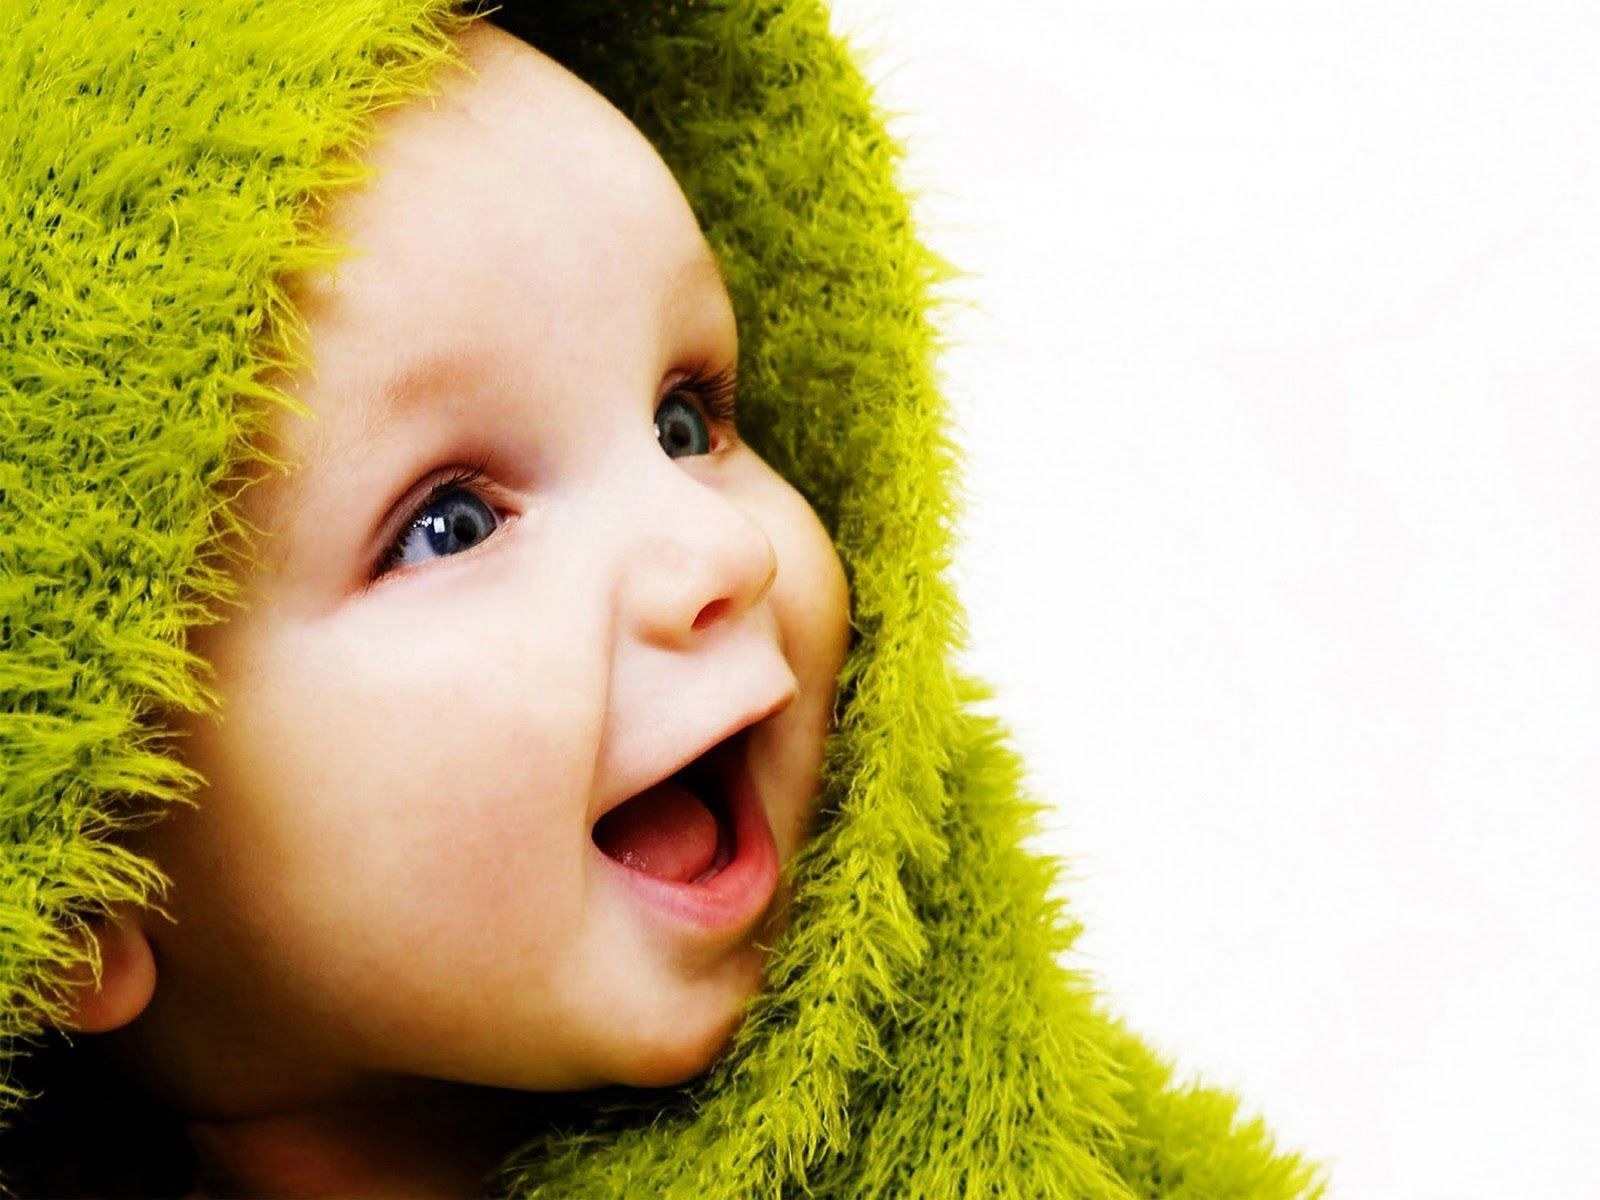 Cute Baby Wallpapers Hd Photos - Baby Hd Wallpapers 1080p - HD Wallpaper 